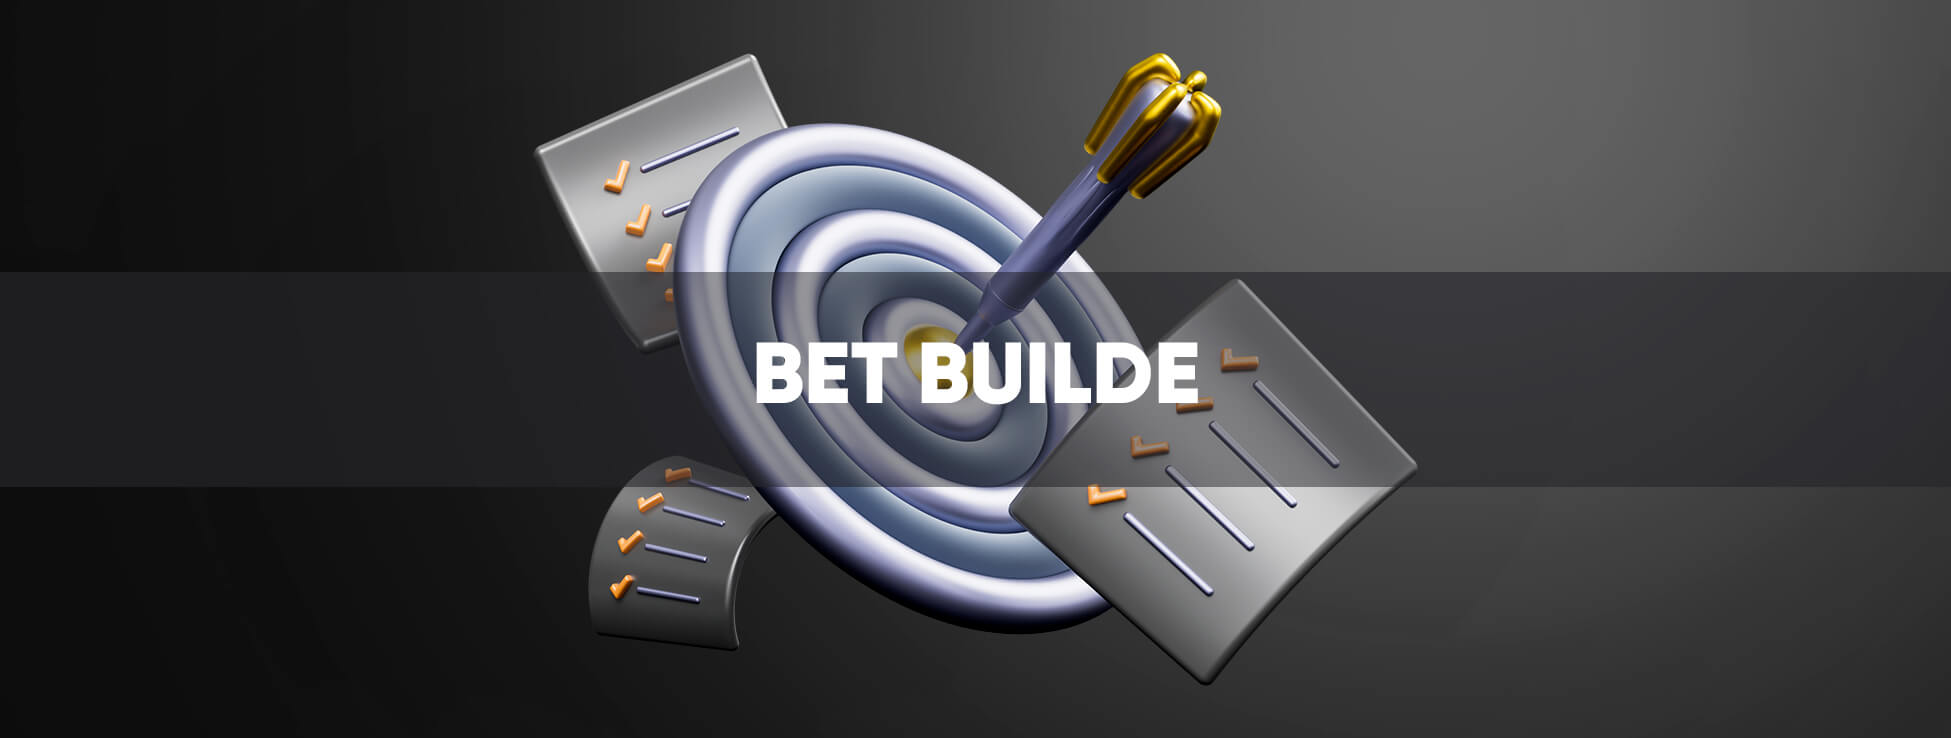 Betting constructor for the British version of Bwin